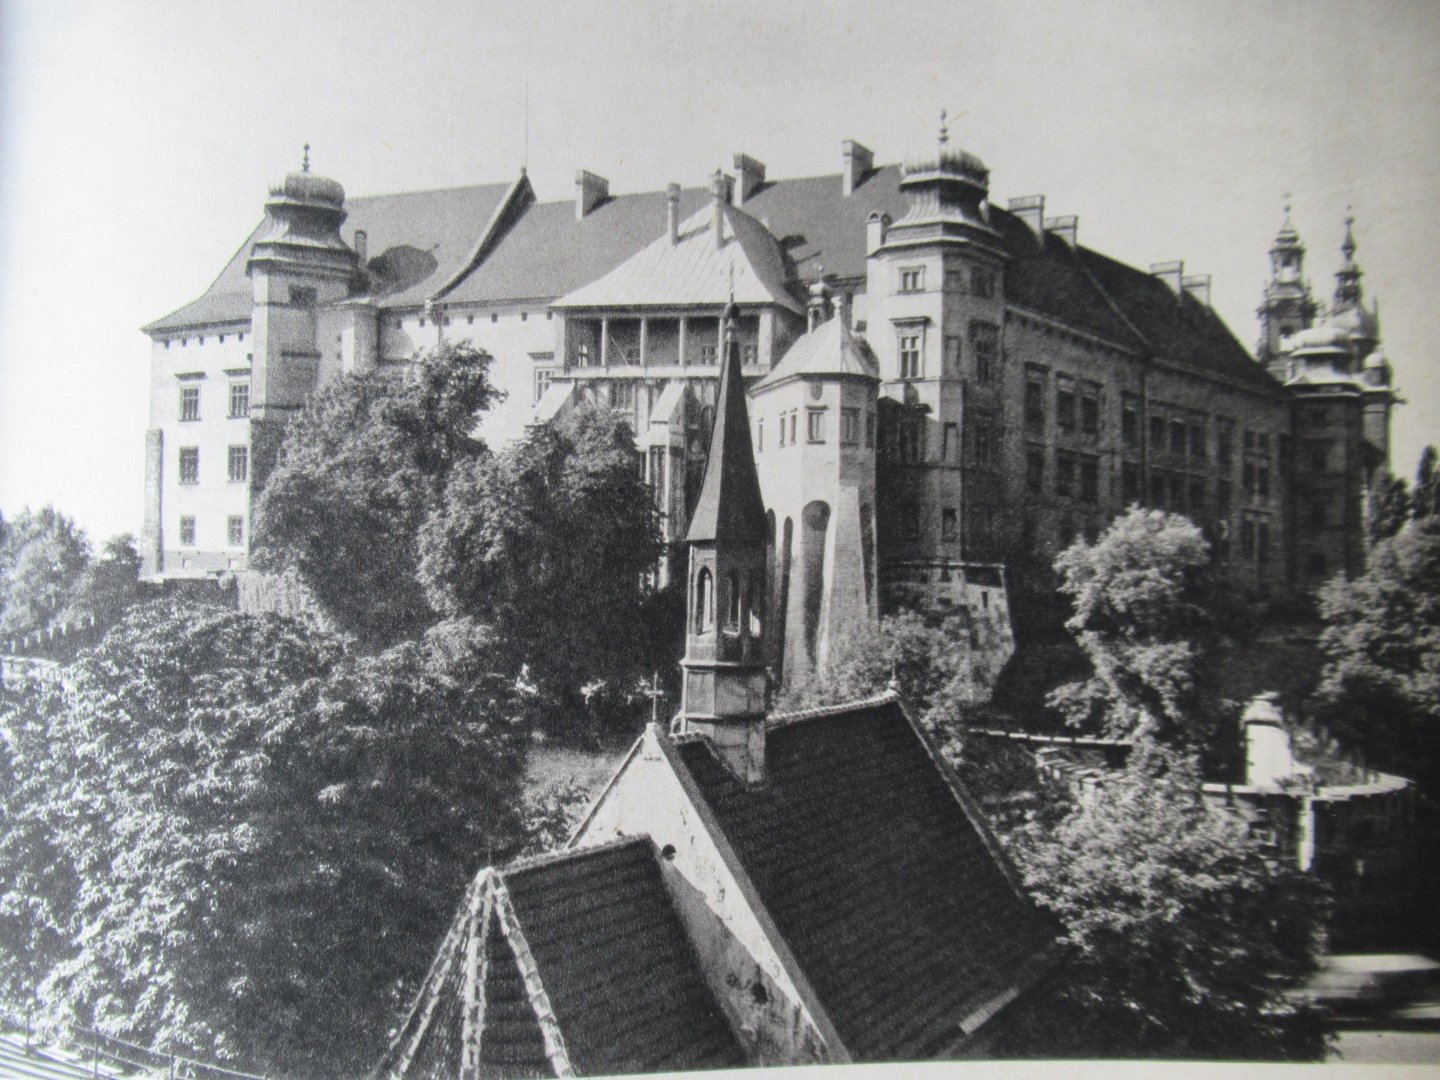 Szablowski, Jerzy - Collections of the Royal Castle of Wawel